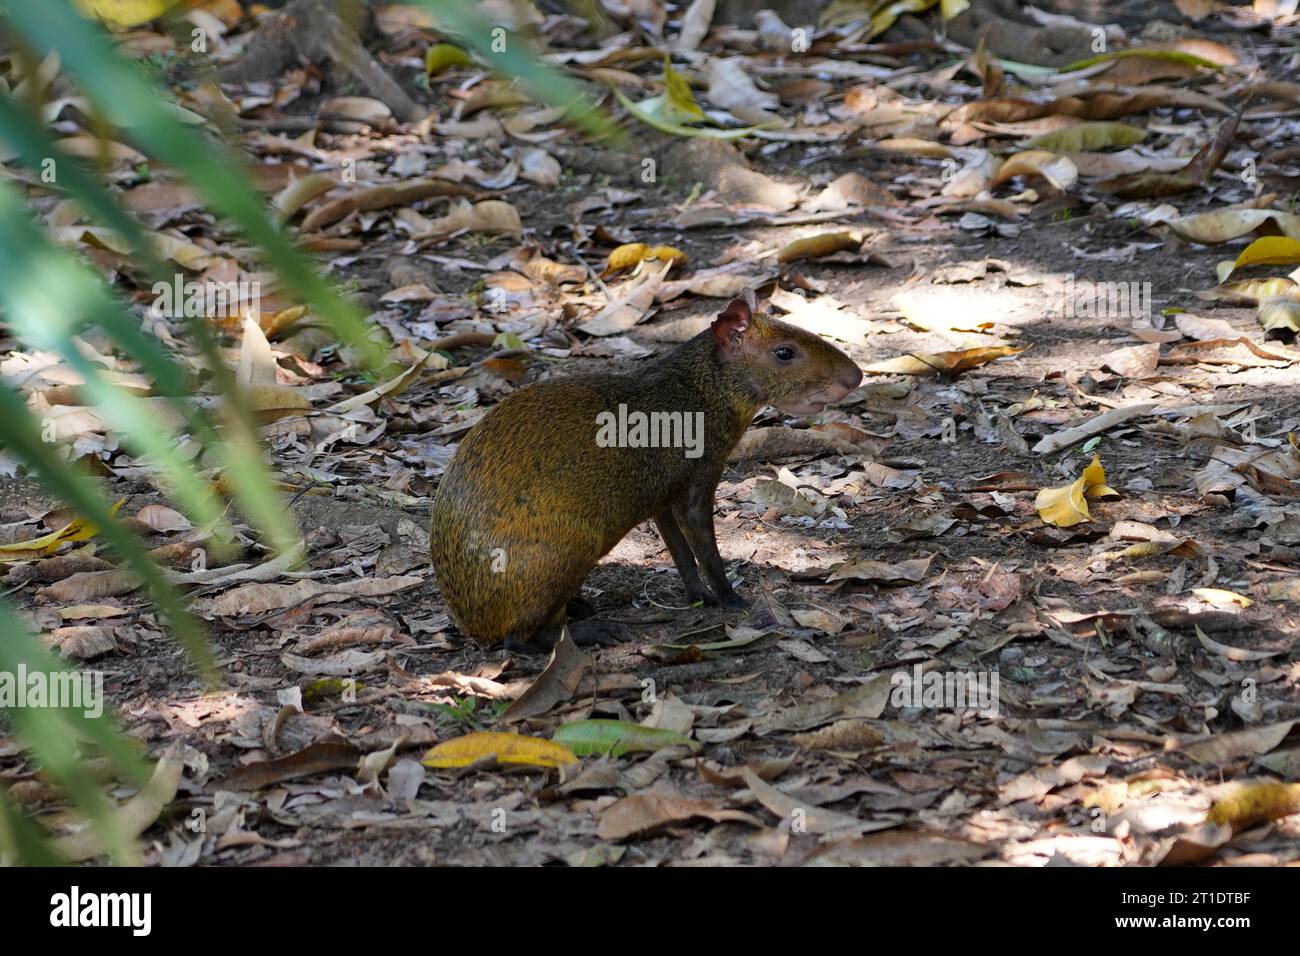 Agouti specimen free in the forest Stock Photo